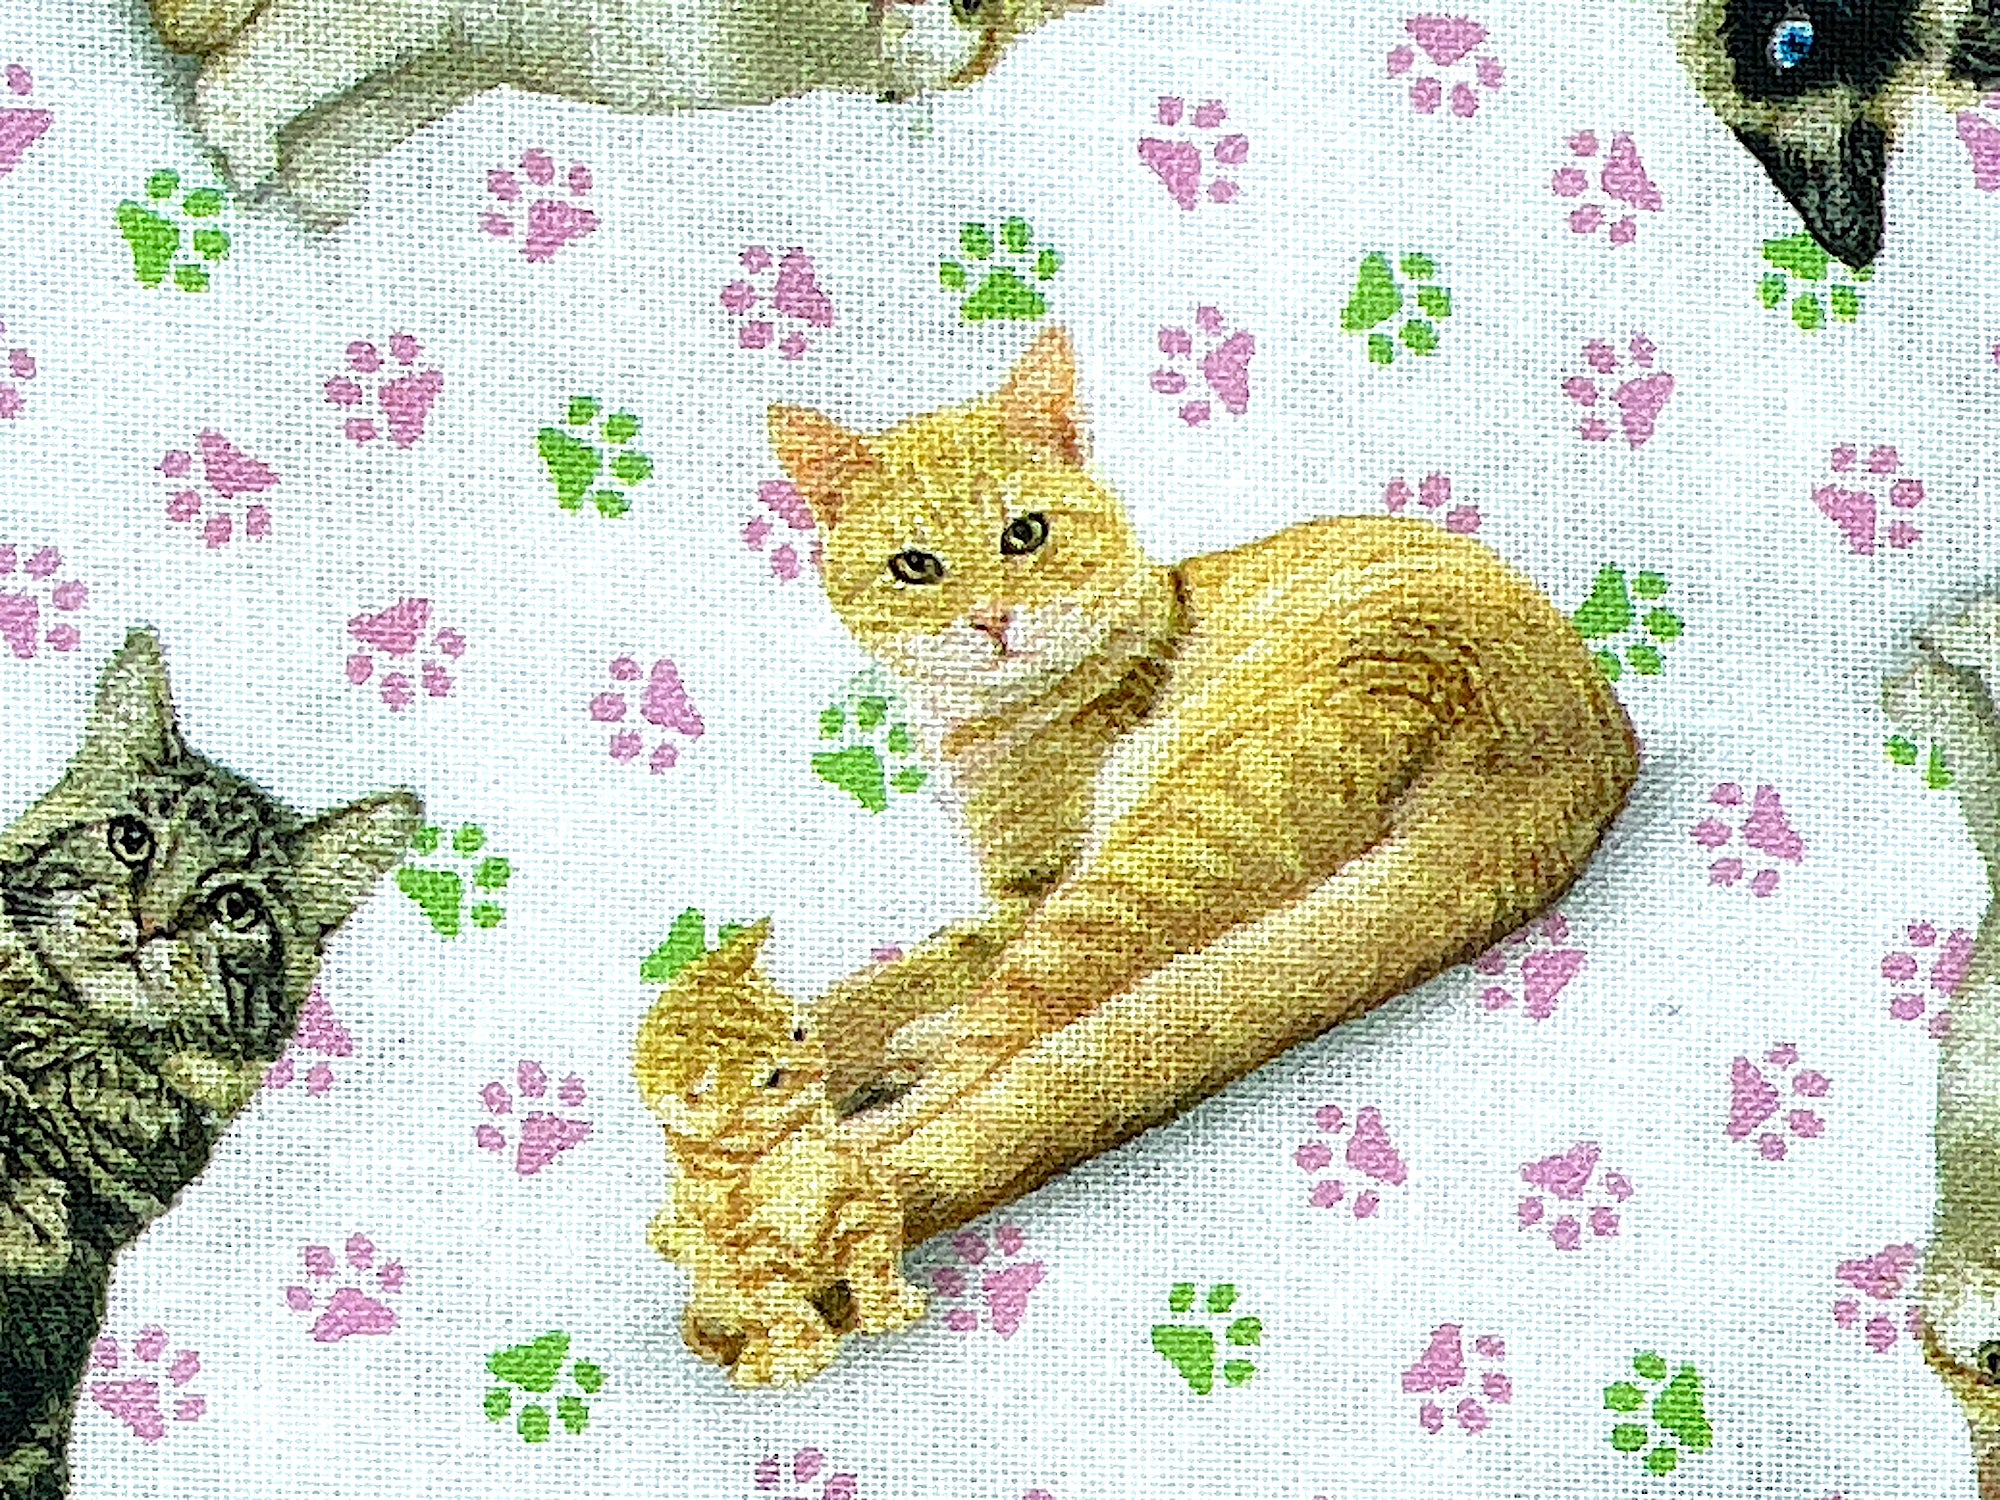 Mom and kitten together surrounded with pink and green paws.